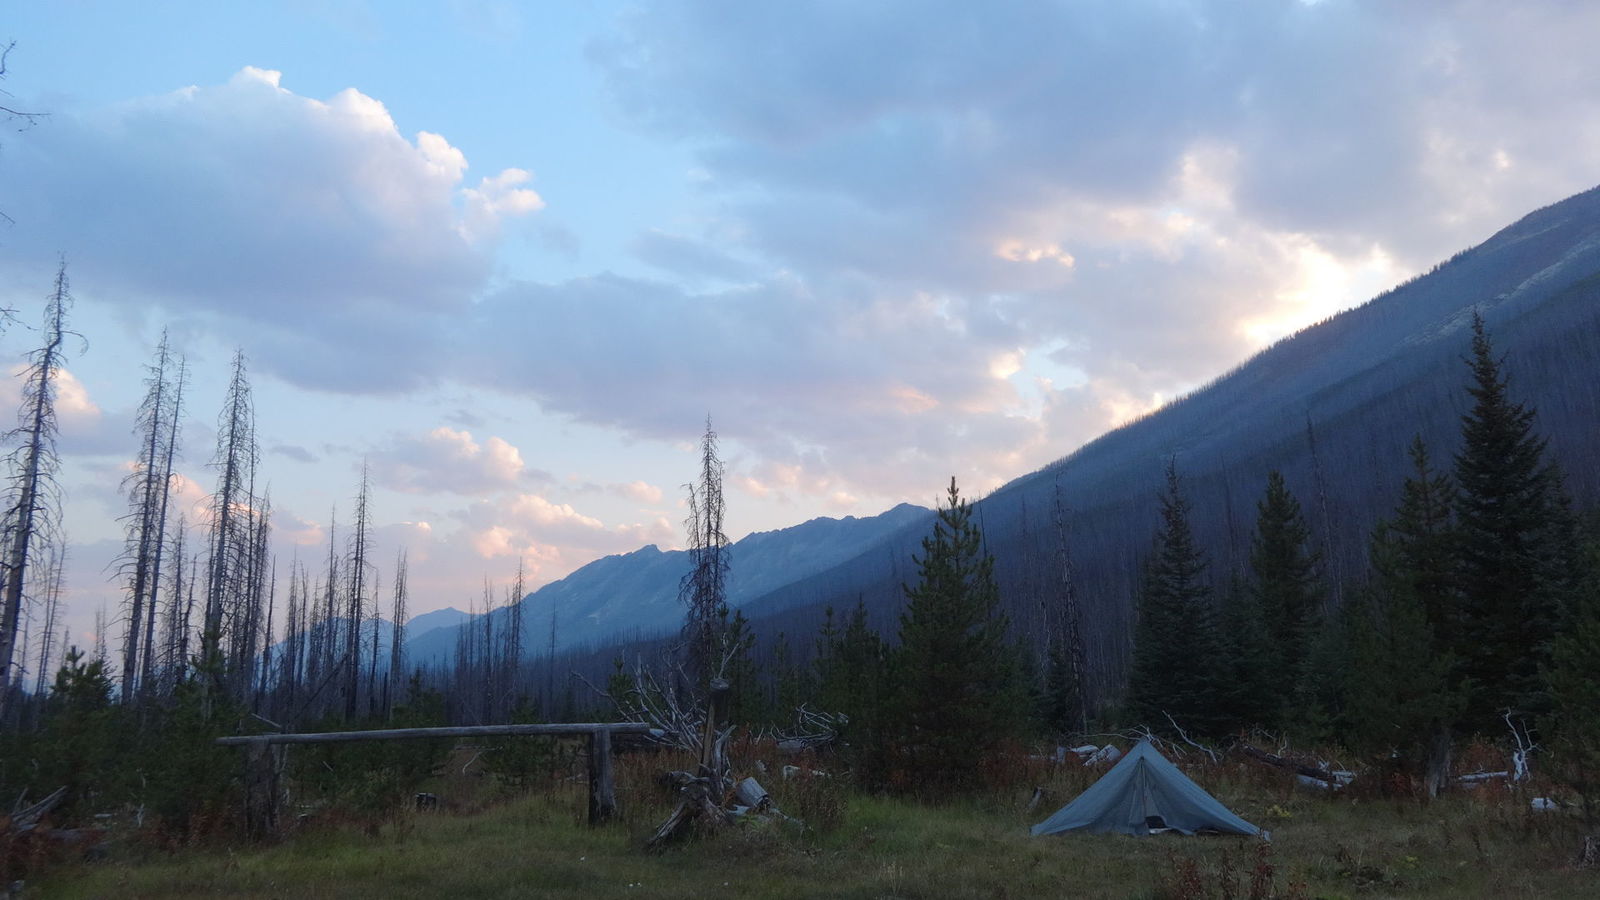 Horseback outfitter camp in White River Valley